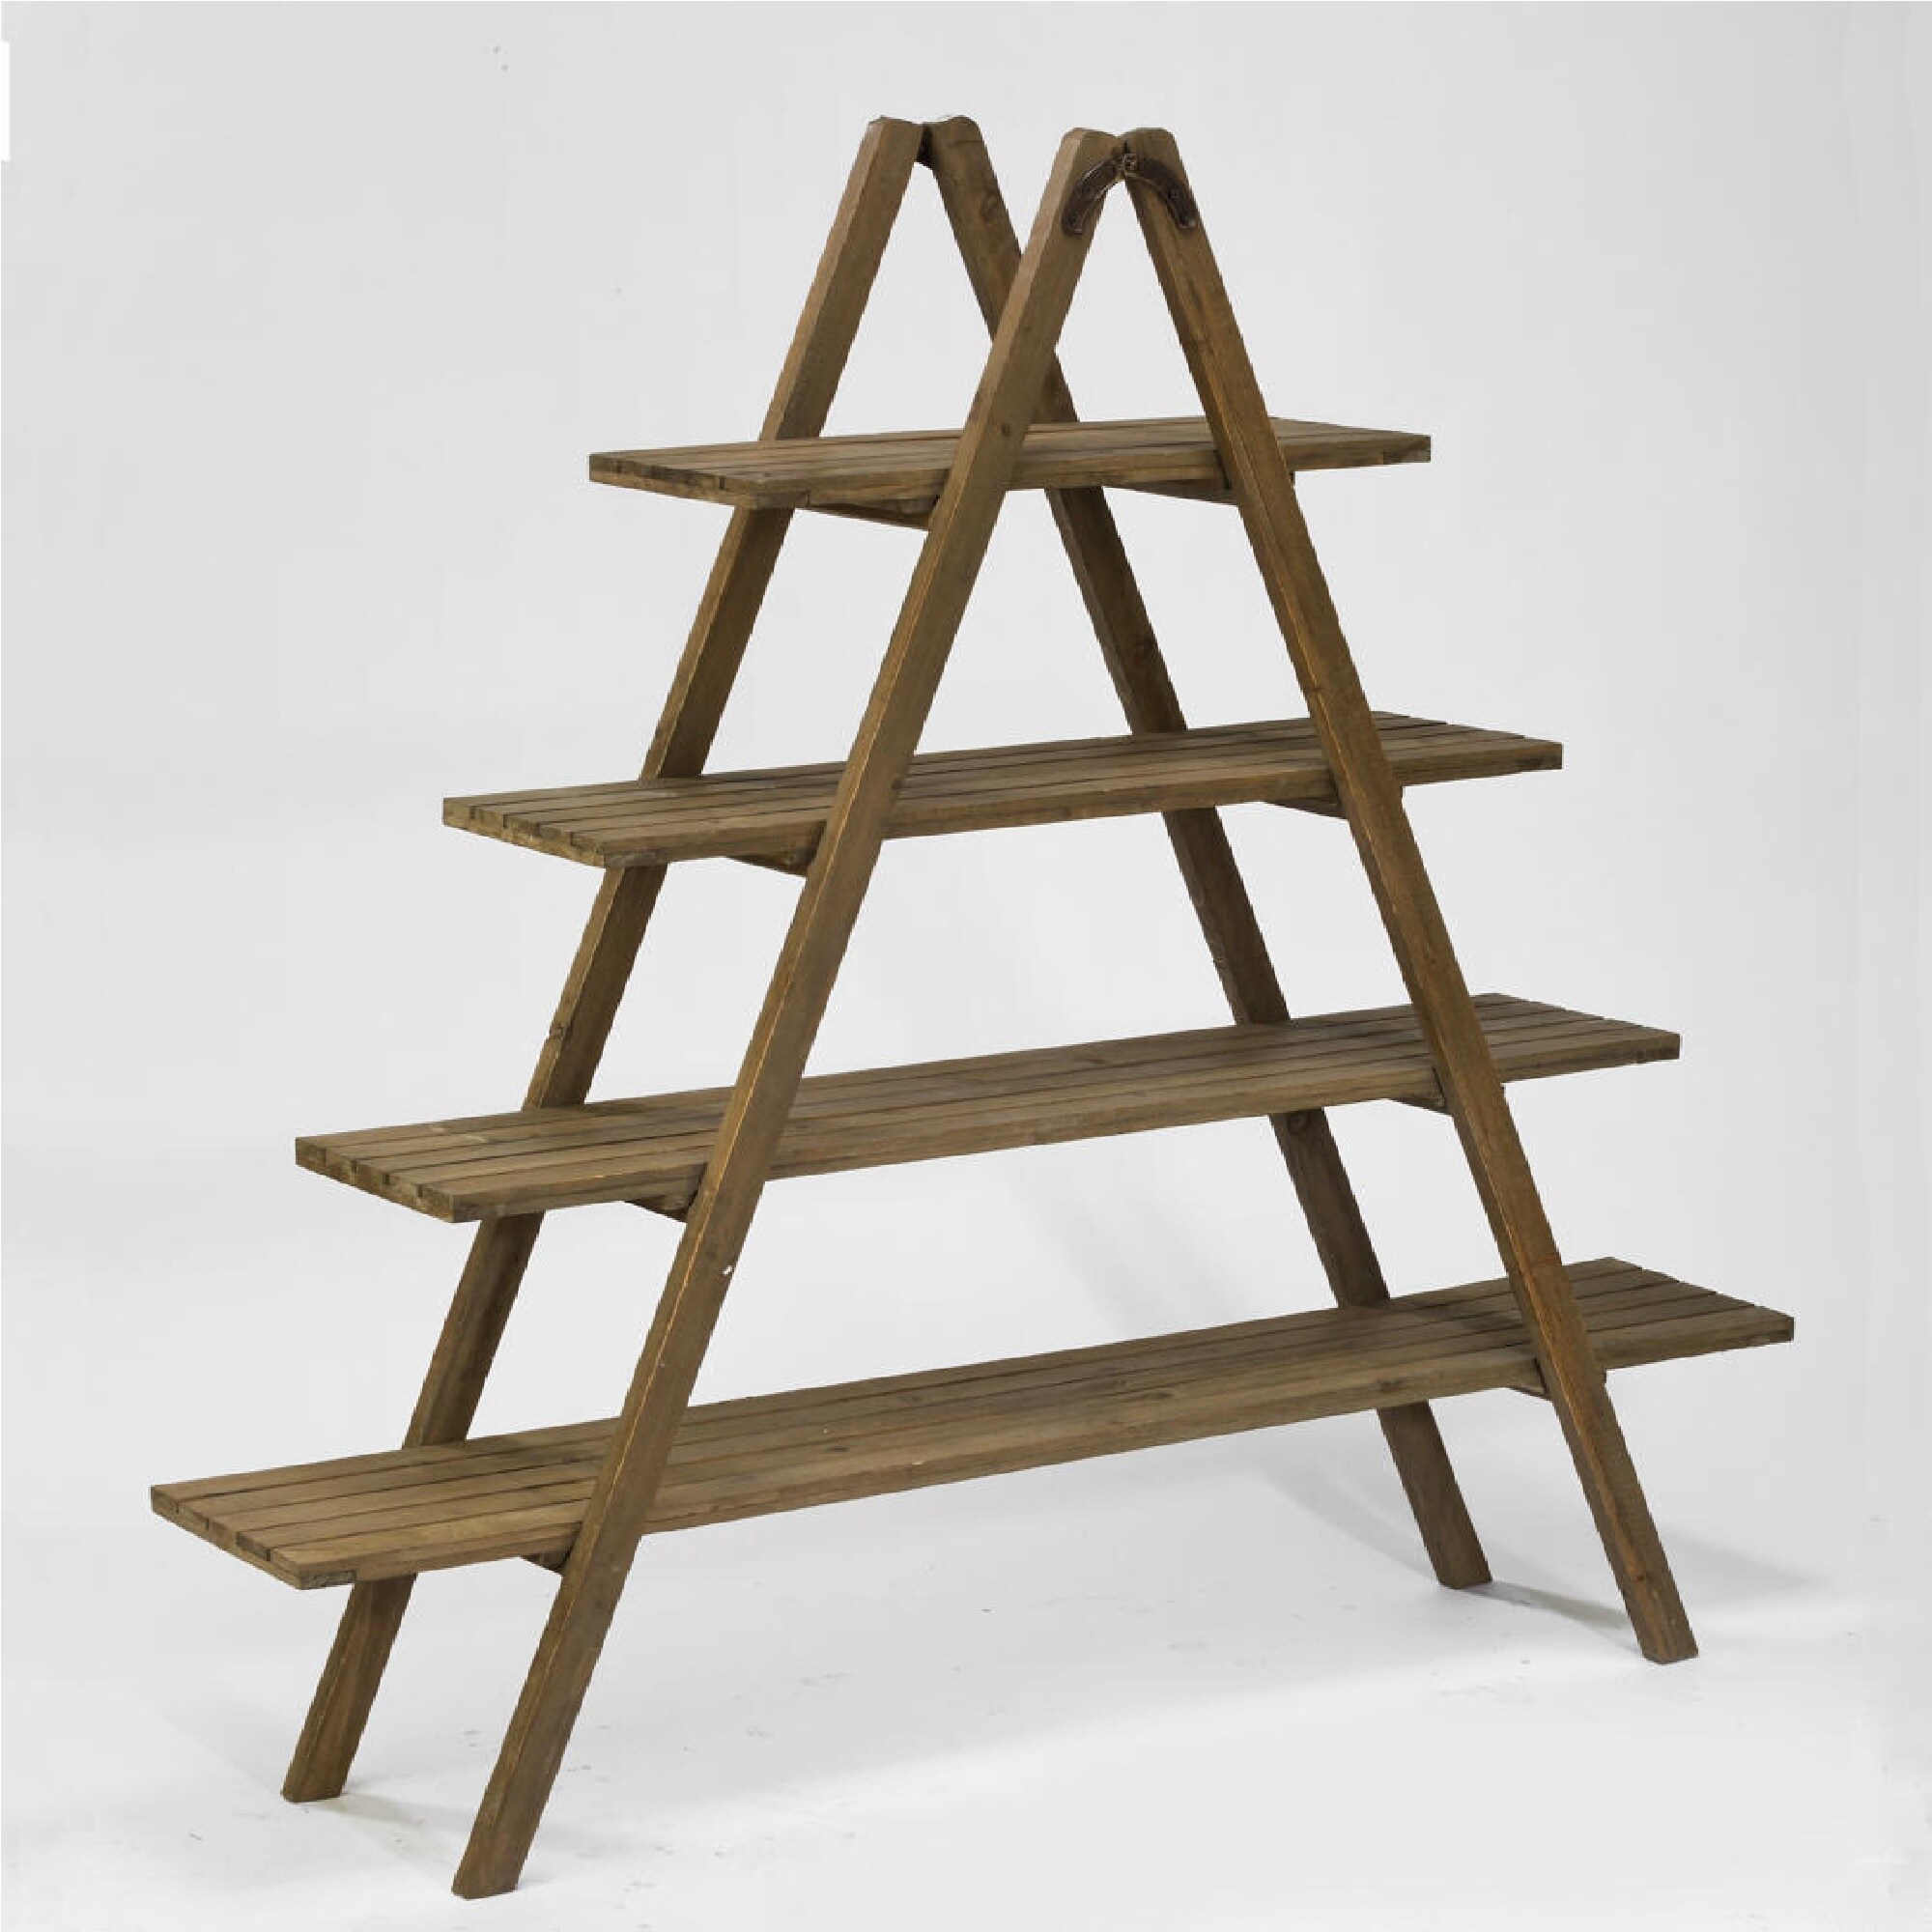 Museum unlock national flag 55" Brown Contemporary A-Frame Open Ladder Display with 4-Tier Shelves -  Overstock - 30218736